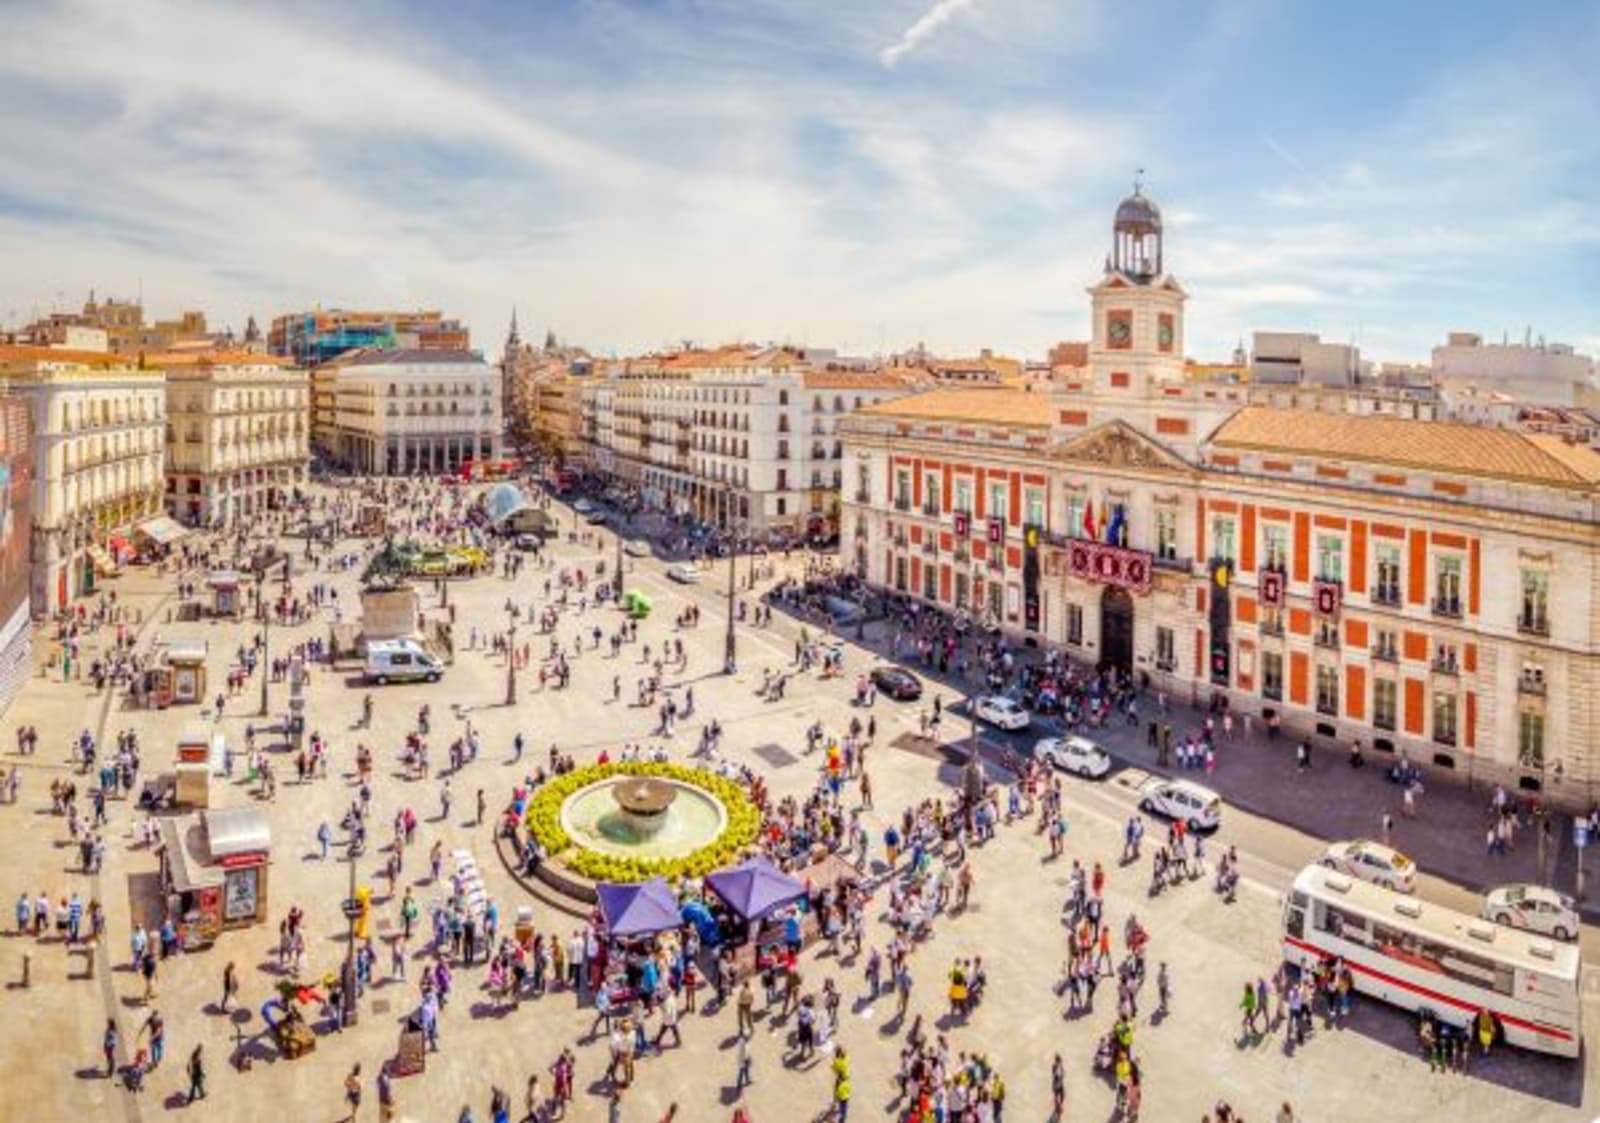 Aerial view of town square and architecture in Placa del Sol, Madrid